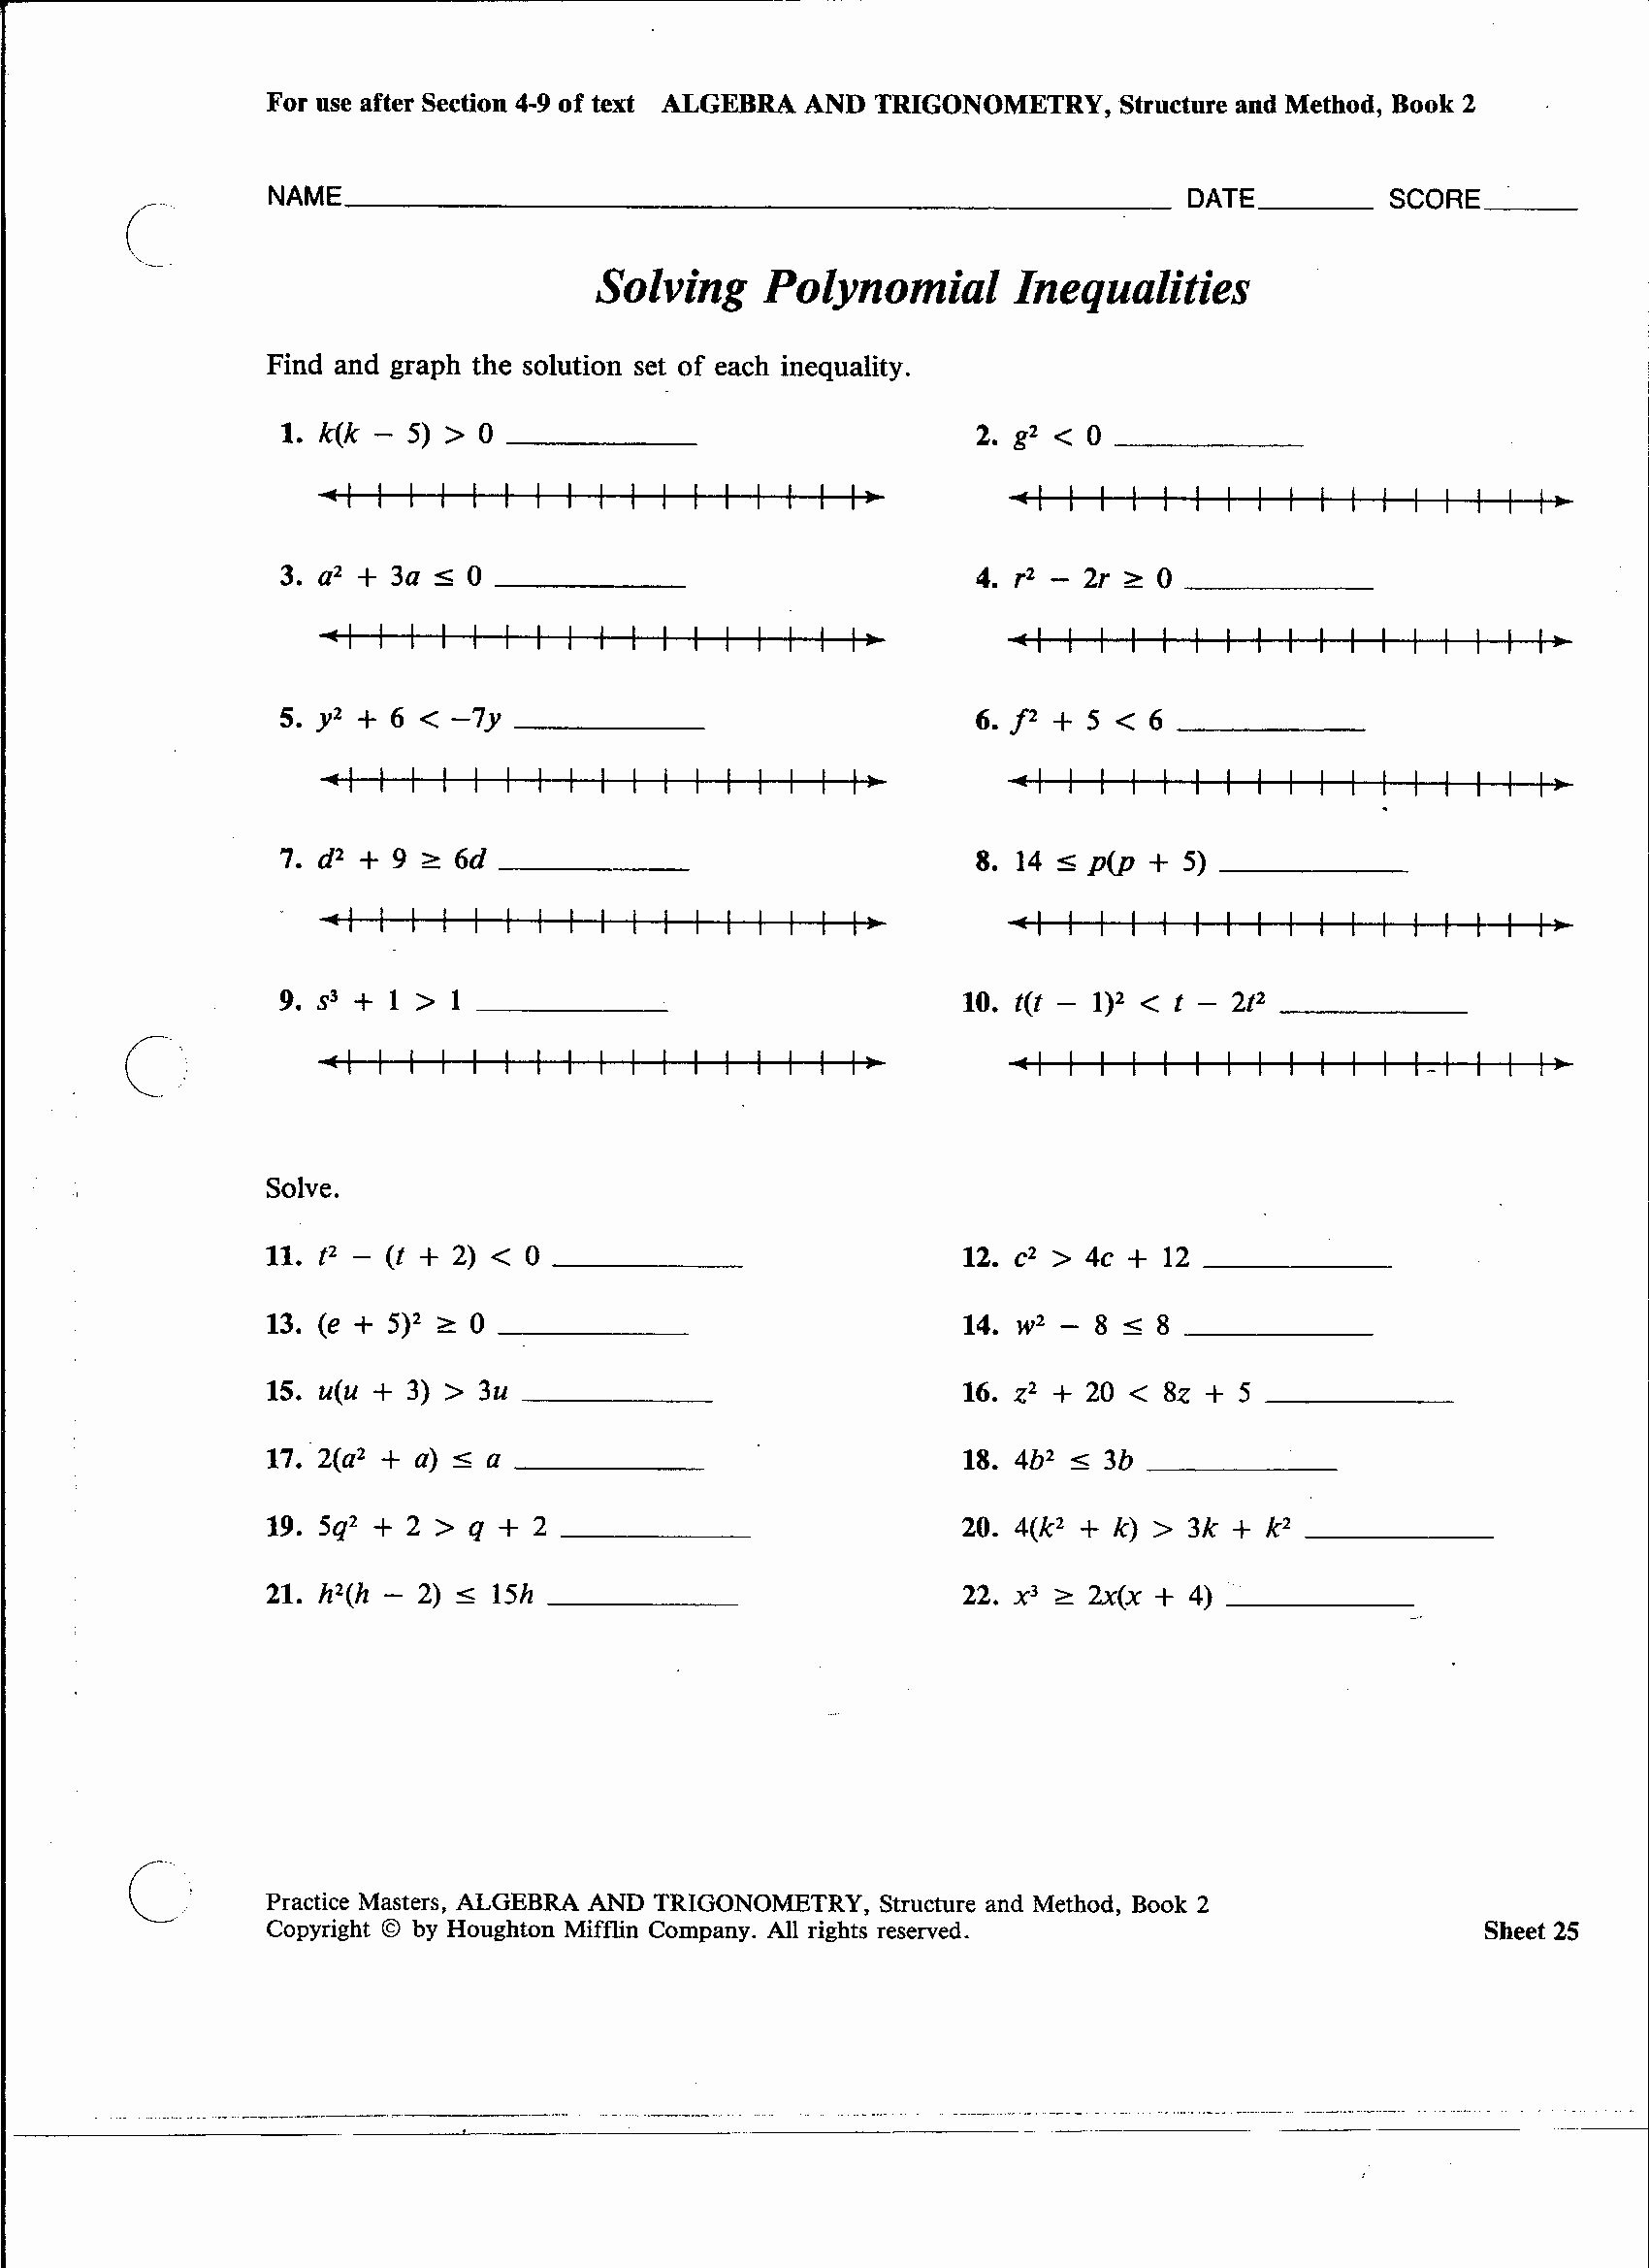 Solving Polynomial Equations Worksheet Answers Luxury Beunier Smith Yvette College Algebra Documents